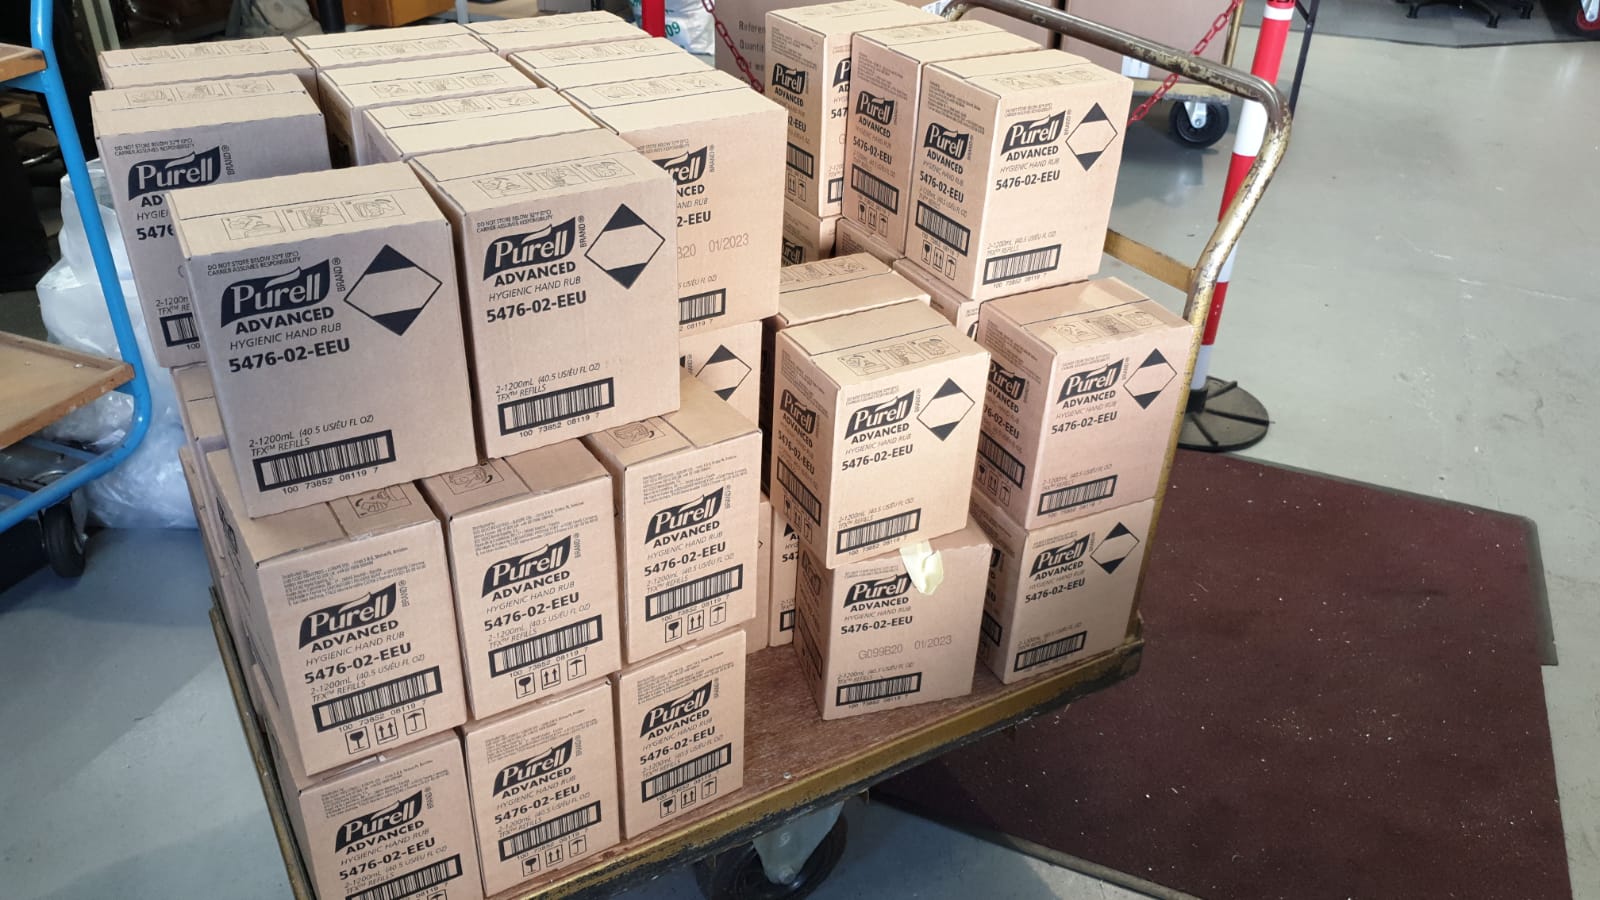 Latest Purell Update - We are now shipping Hand Hygiene again